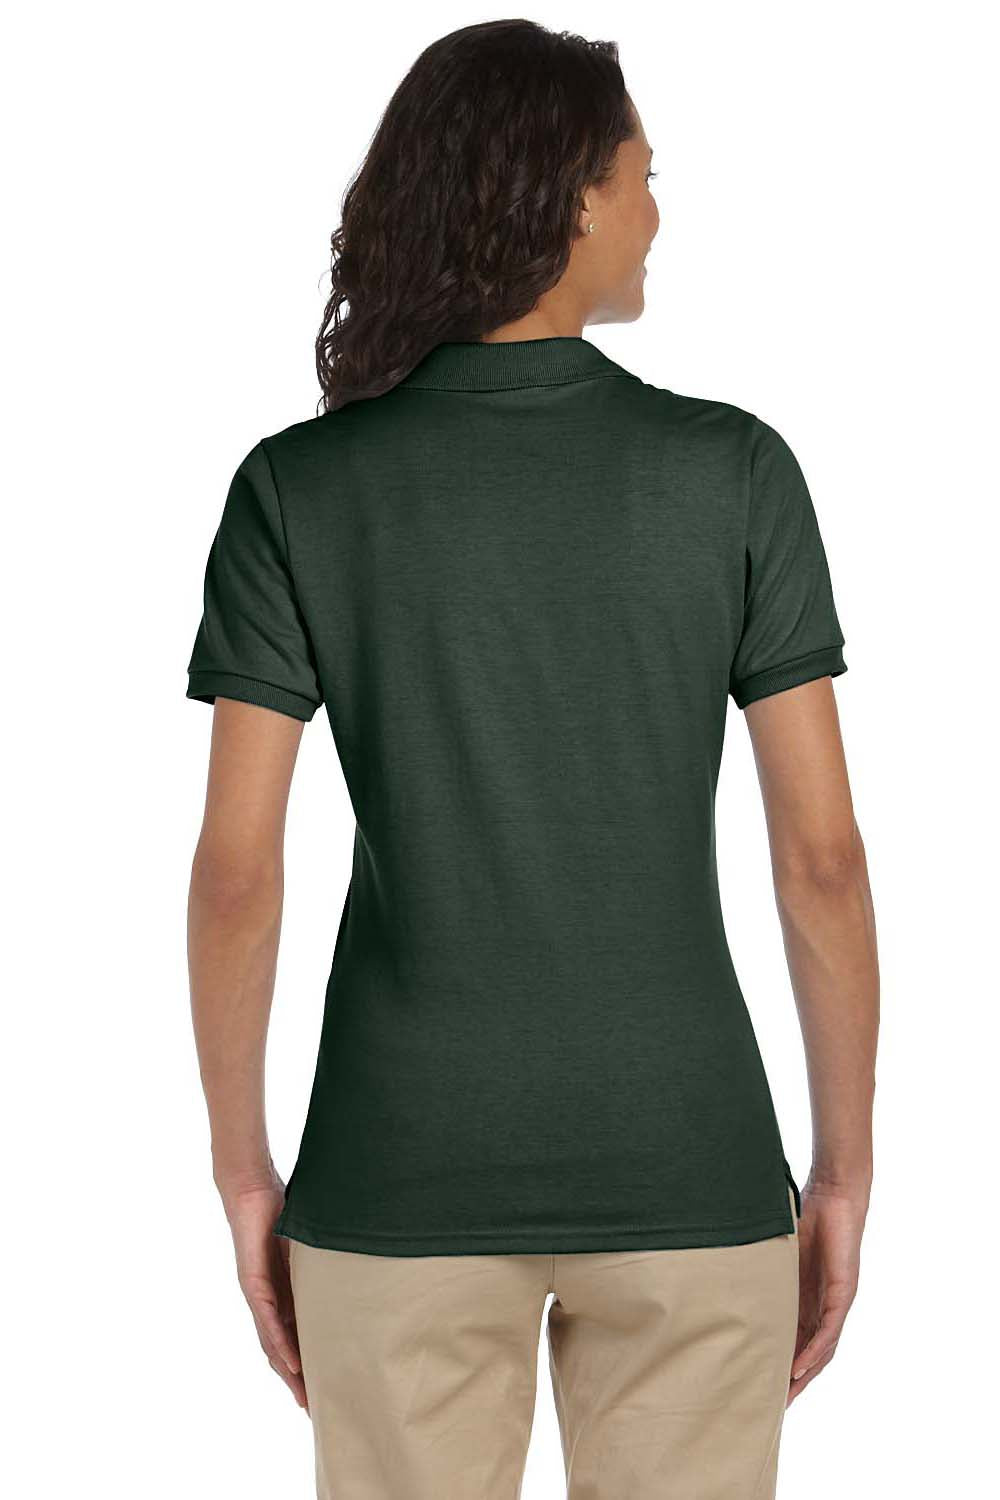 Jerzees 437W Womens SpotShield Stain Resistant Short Sleeve Polo Shirt Forest Green Back